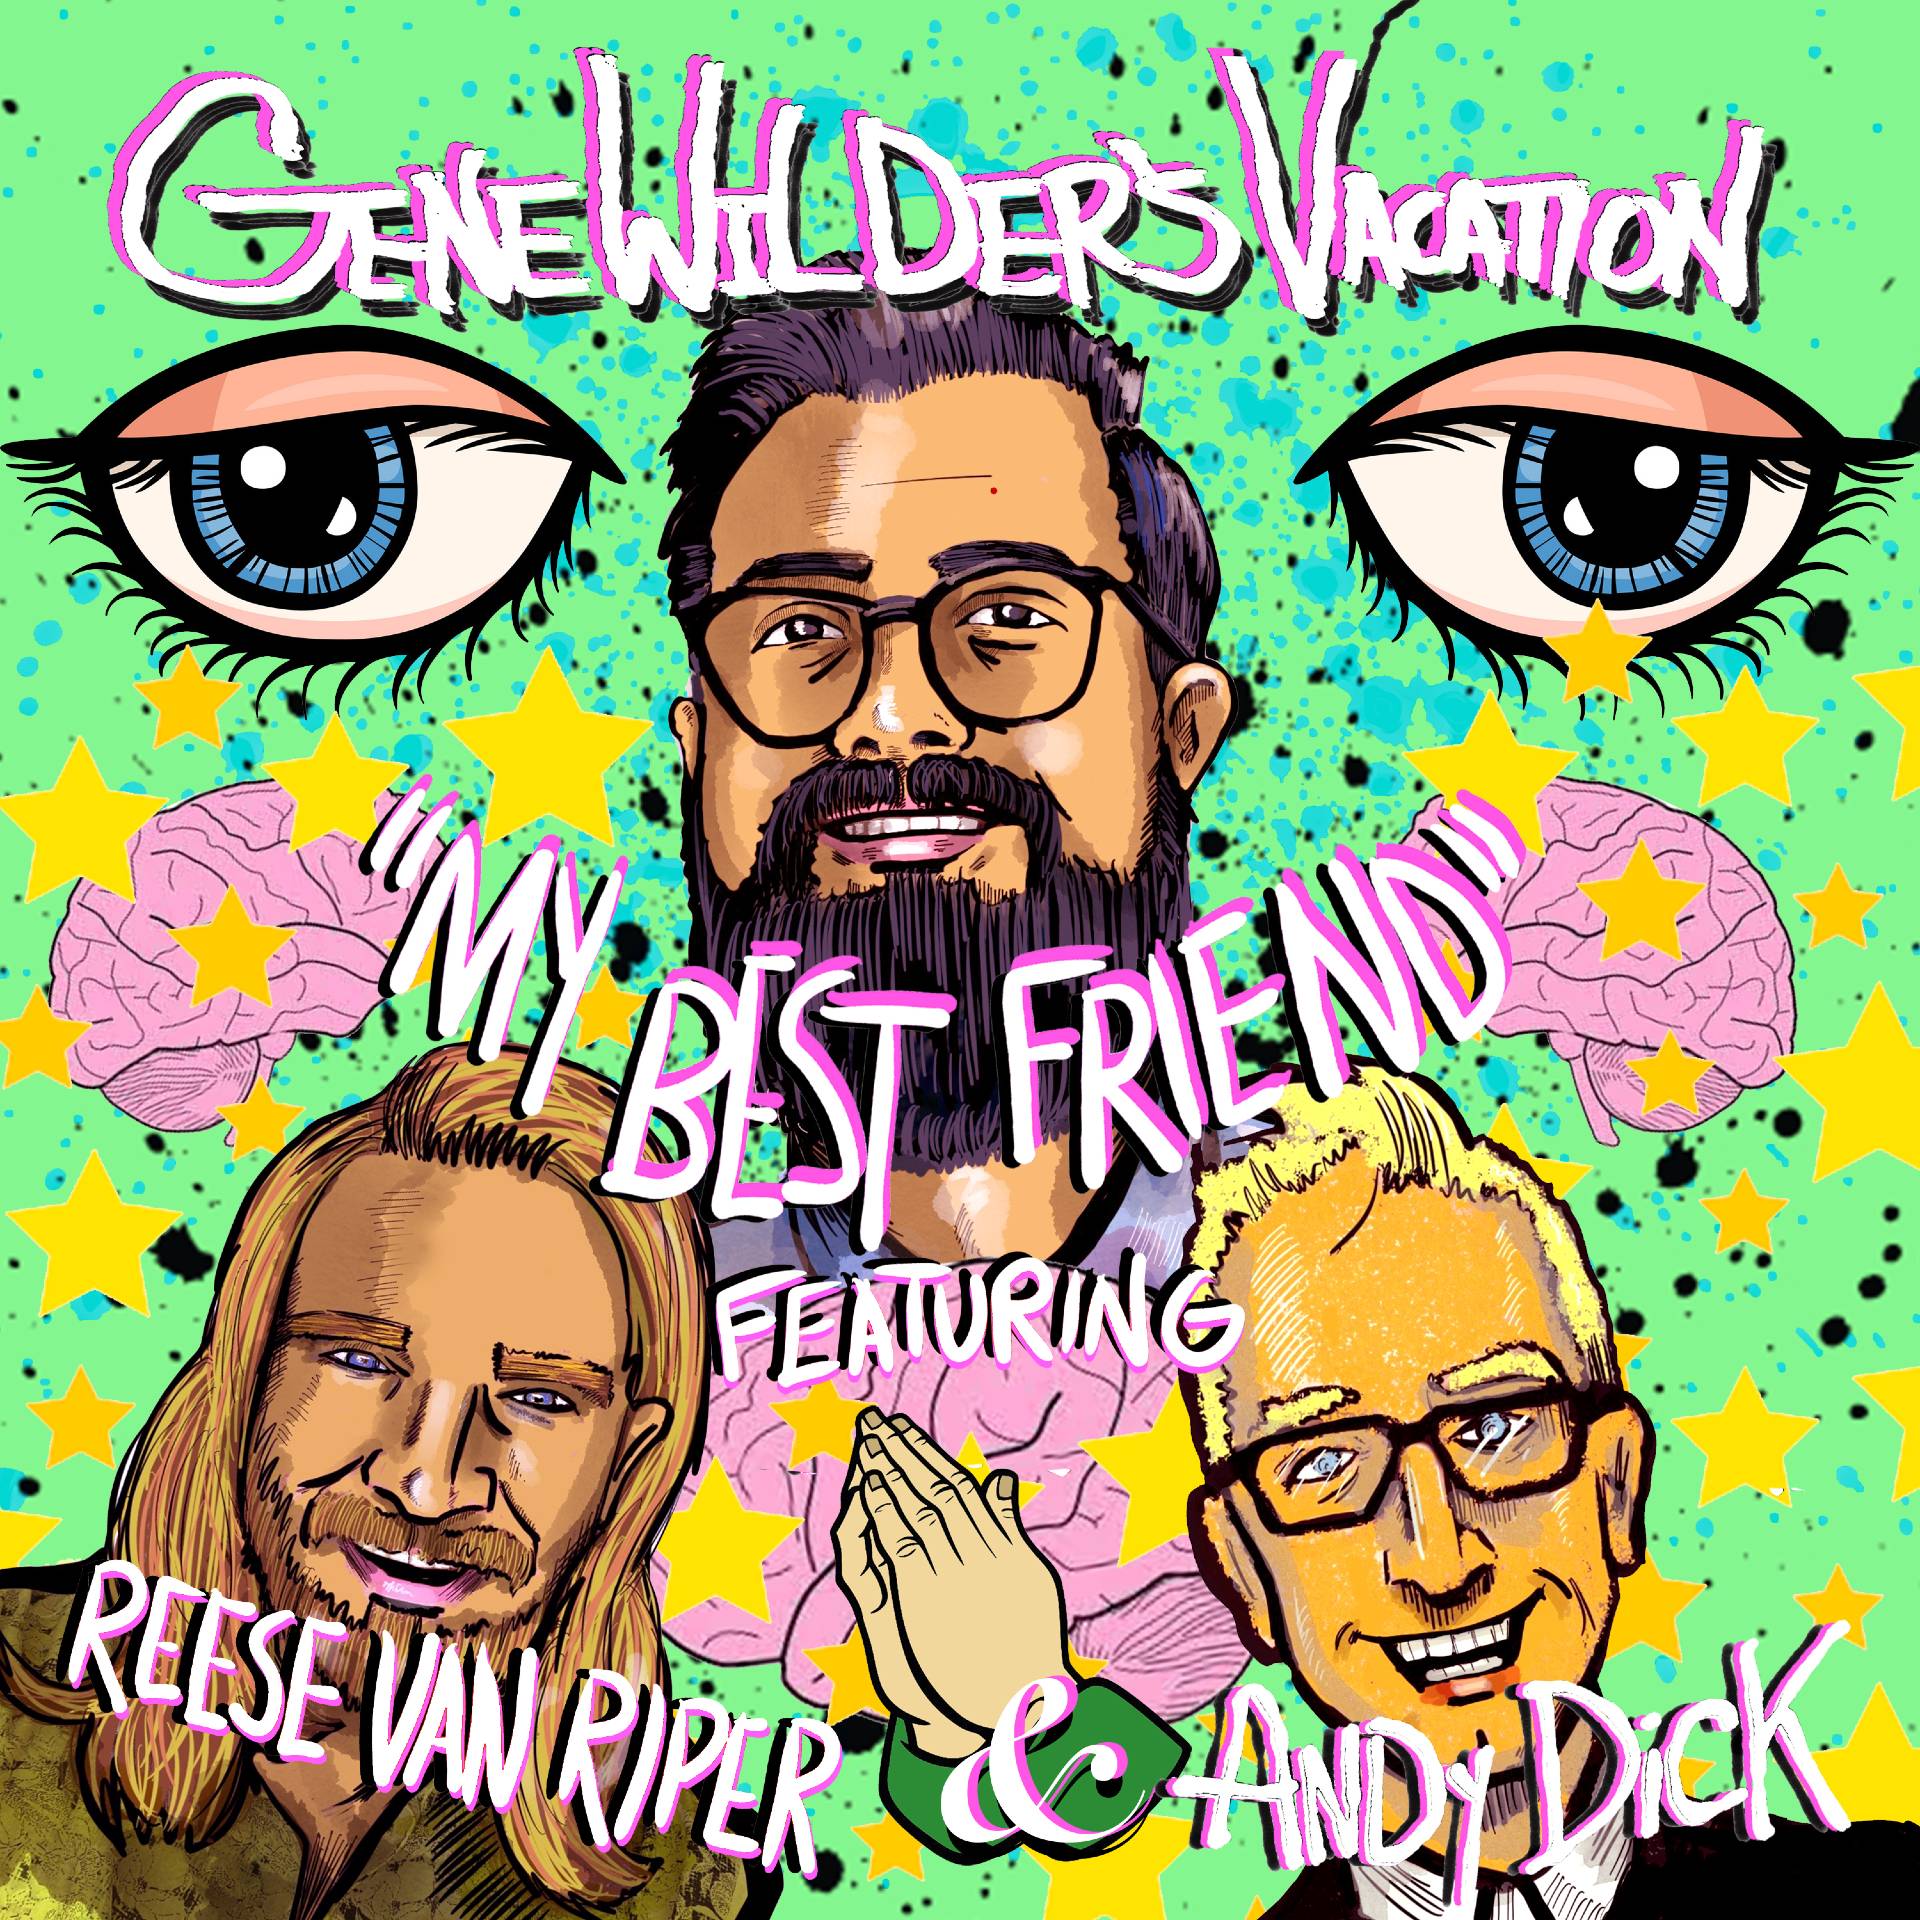 Artwork for the single "My Best Friend" ft. Andy Dick and Reese Van Riper by Gene Wilder’s Vacation